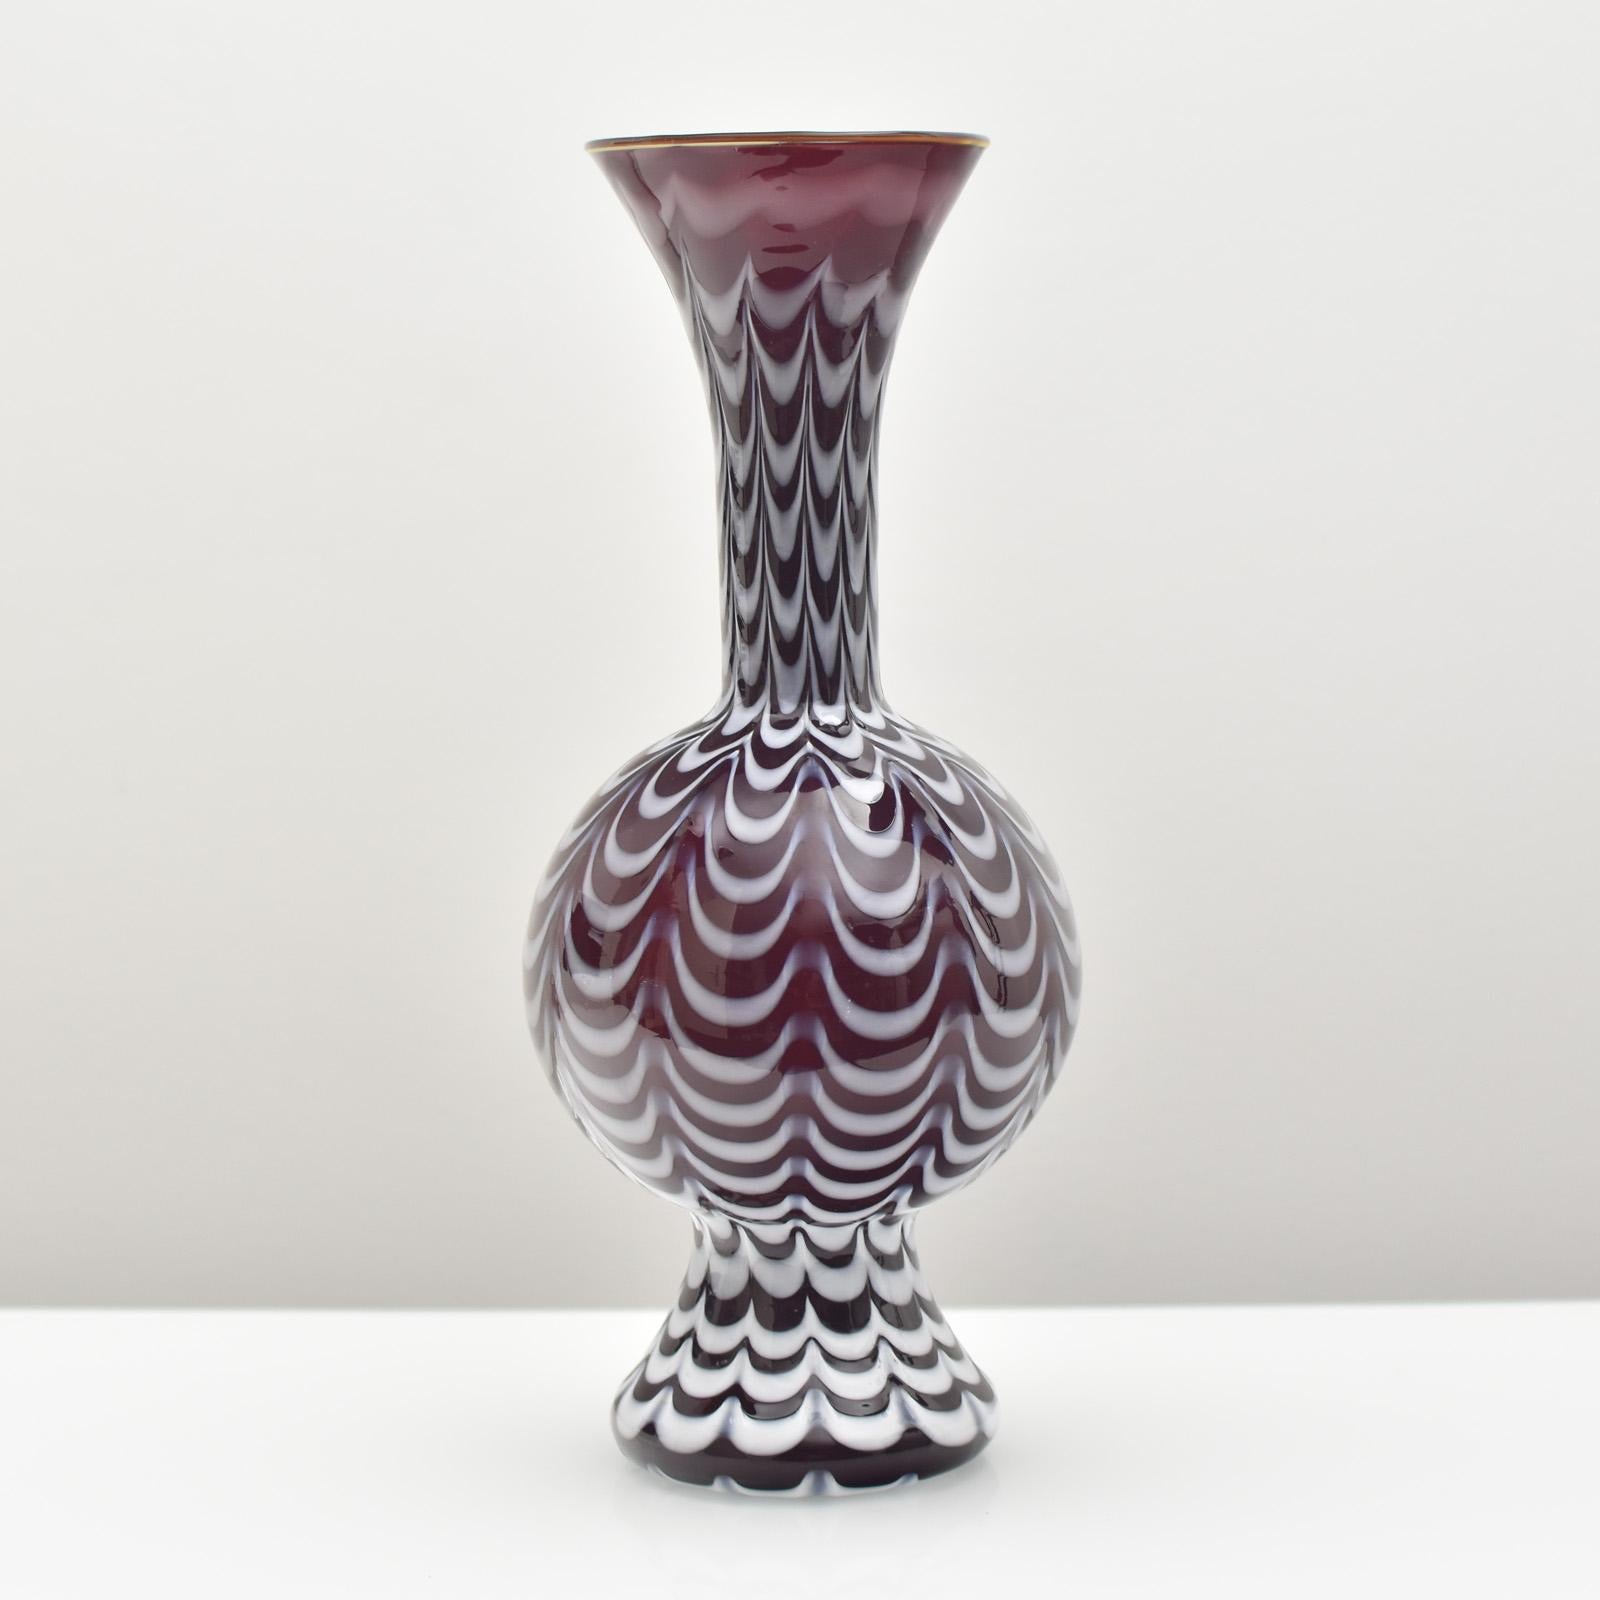 This is a large and elegant vintage Fenicio art glass vase made by Fratelli Toso around 1940. The vase is crafted from high-quality glass and features a stunning deep ruby red color with white accents. The Fenicio technique used in creating this